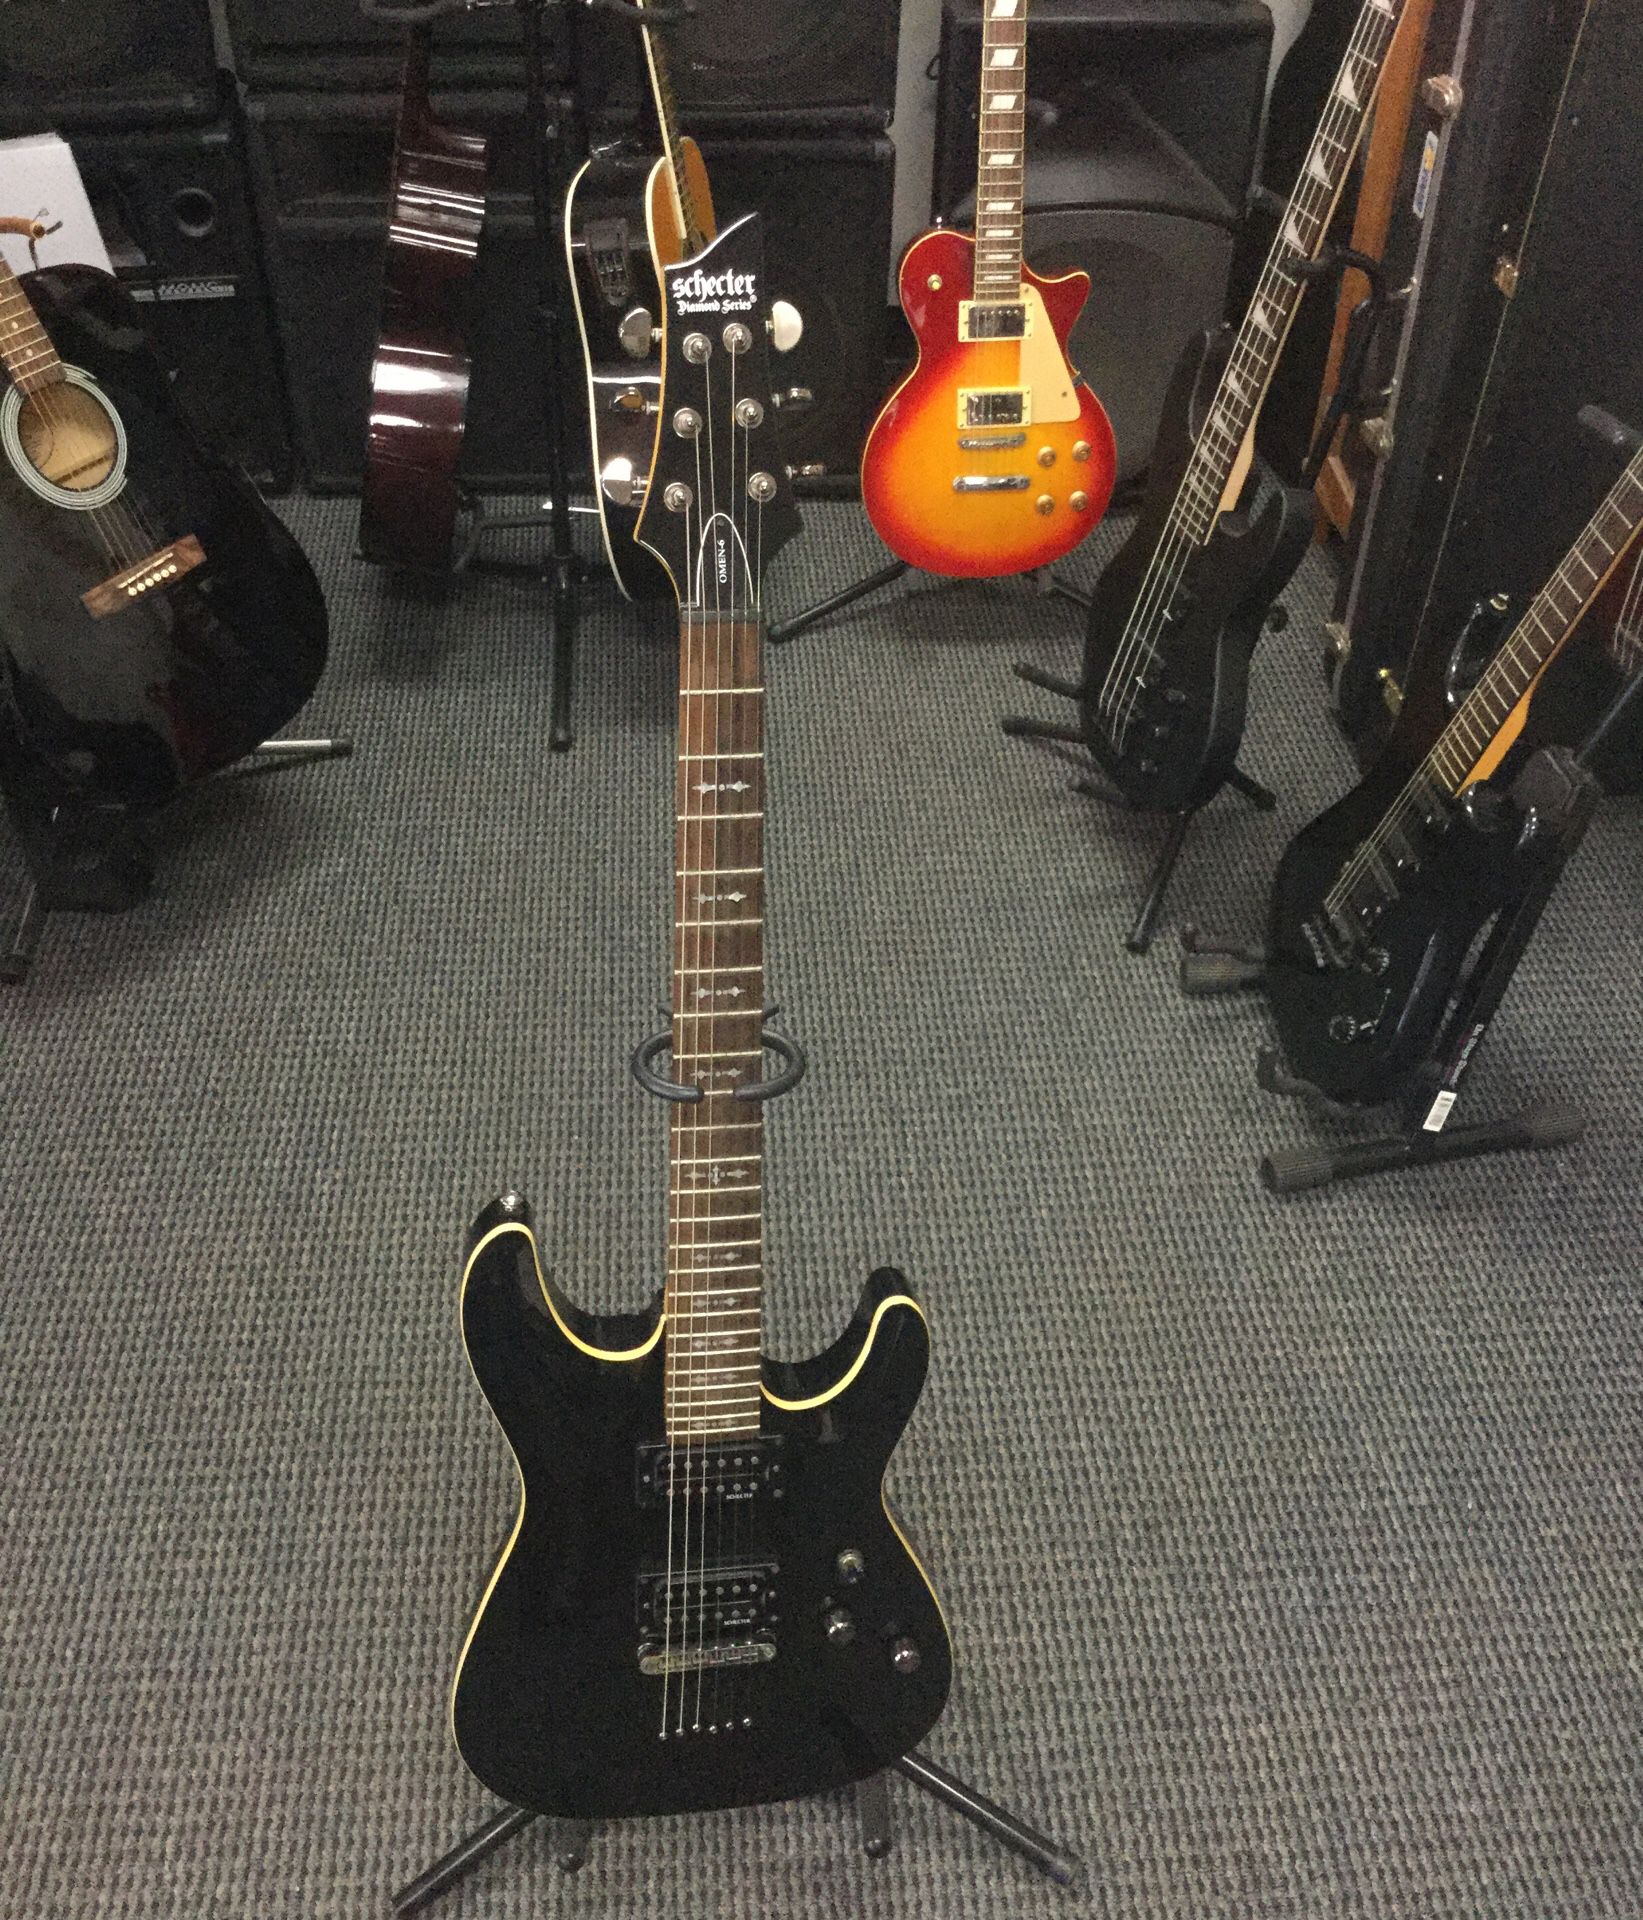 6 string schecter guitar with case